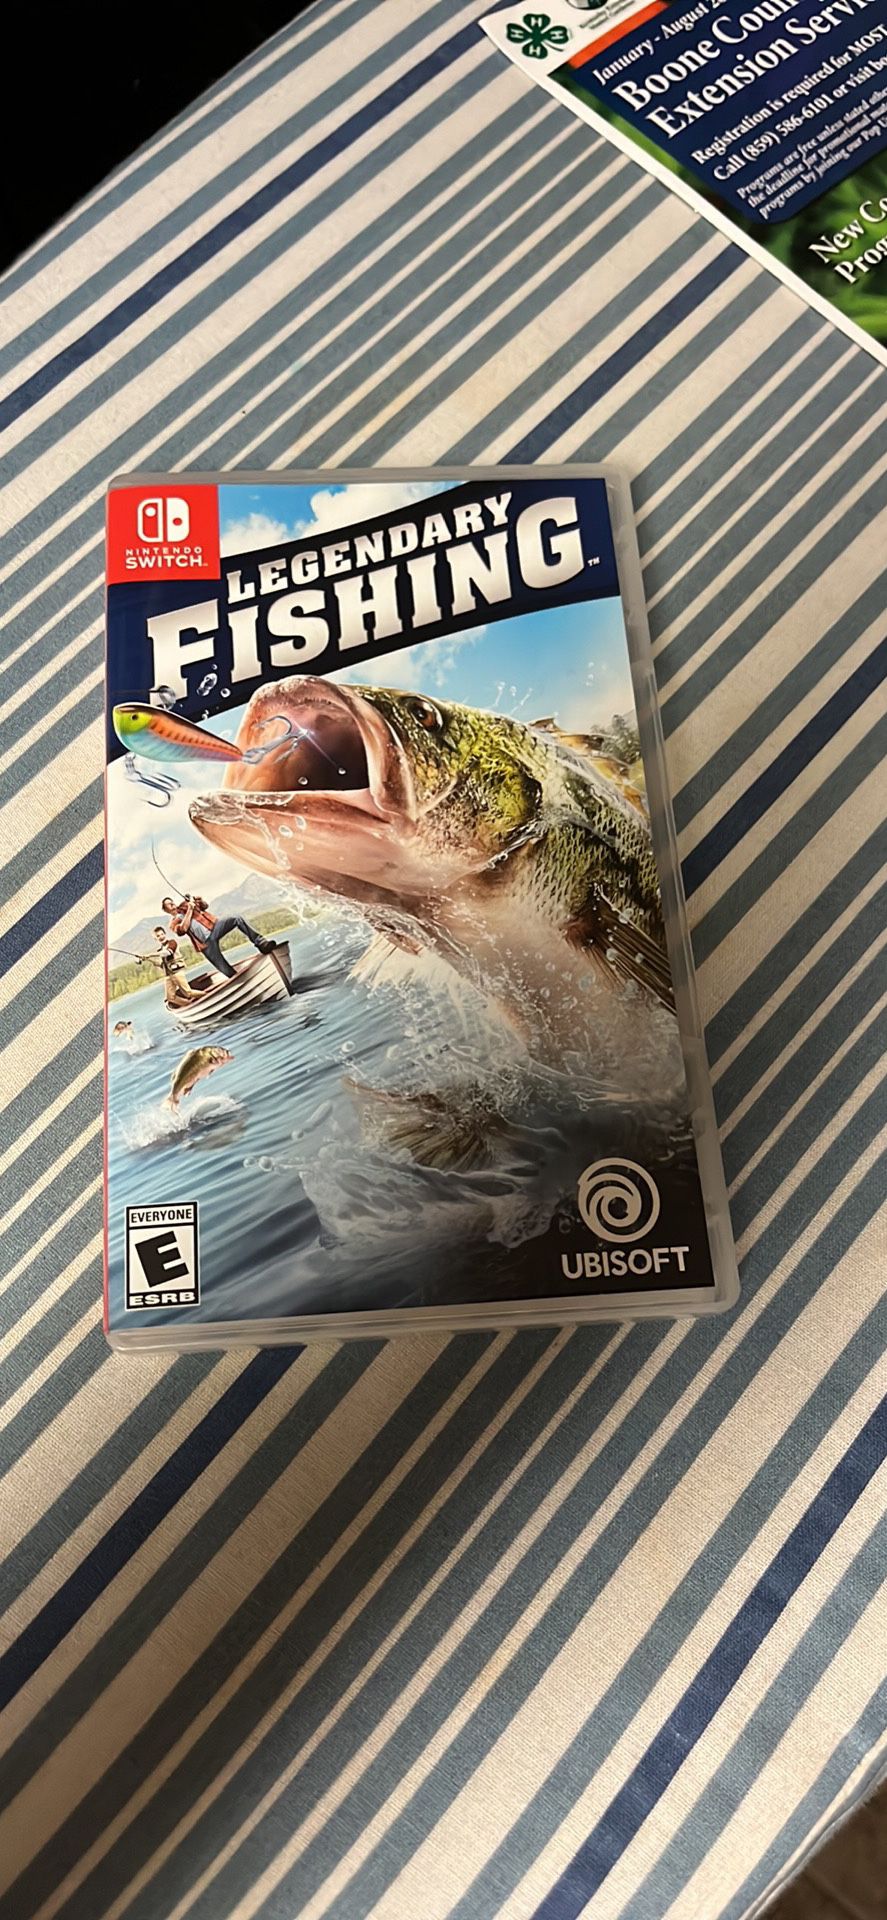 Legendary Fishing Nintendo Switch Game for Sale in Burlington, KY - OfferUp